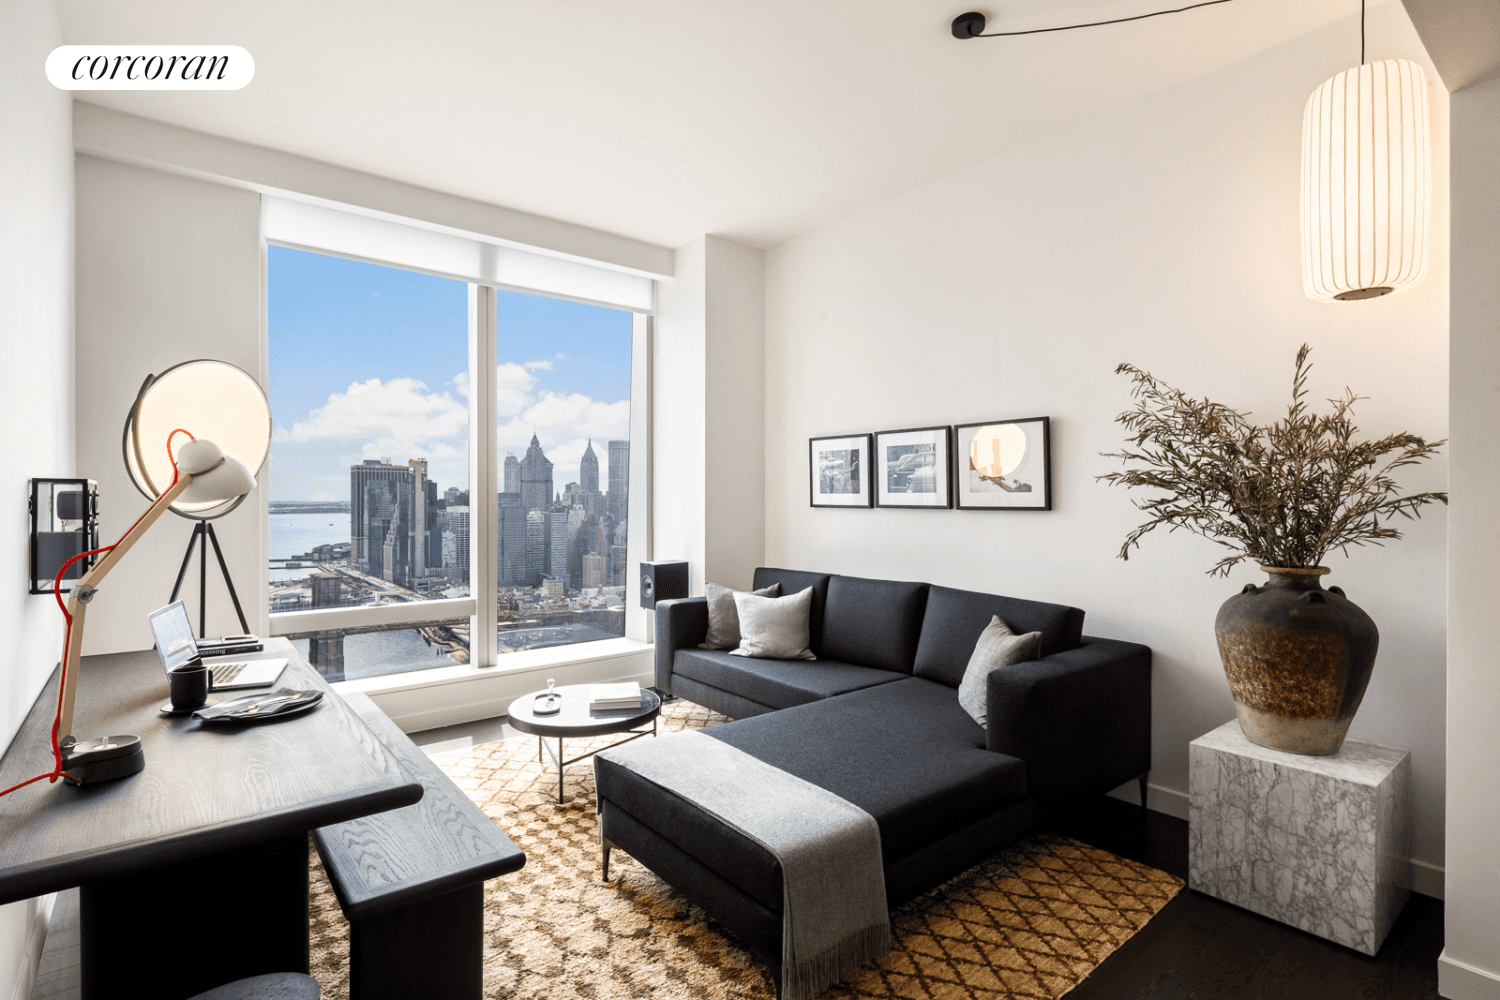 ONE MANHATTAN SQUARE OFFERS ONE OF THE LAST 20 YEAR TAX ABATEMENTS AVAILABLE IN NEW YORK CITYResidence 11P is a 723 square foot one bedroom, one bathroom with an open ...